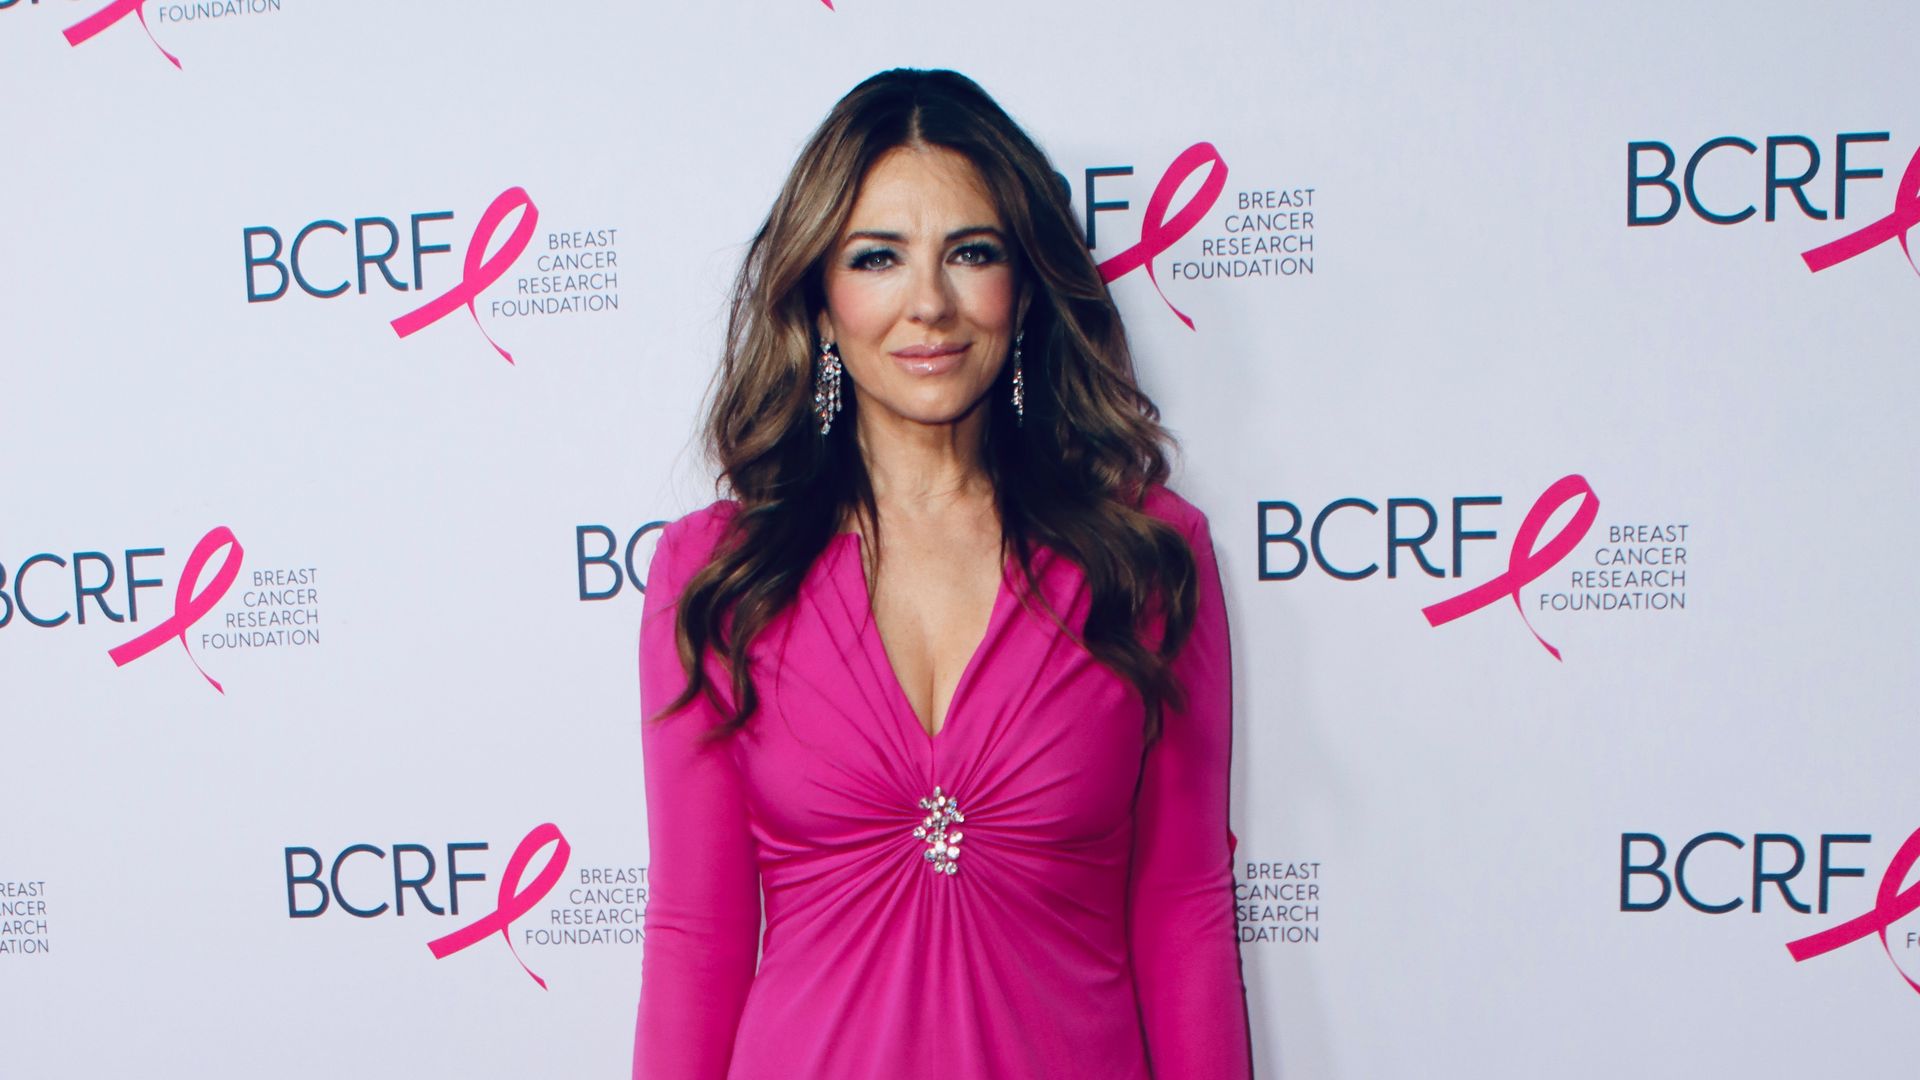 Elizabeth Hurley wows in pink gown as she leads star-studded BCRF red carpet